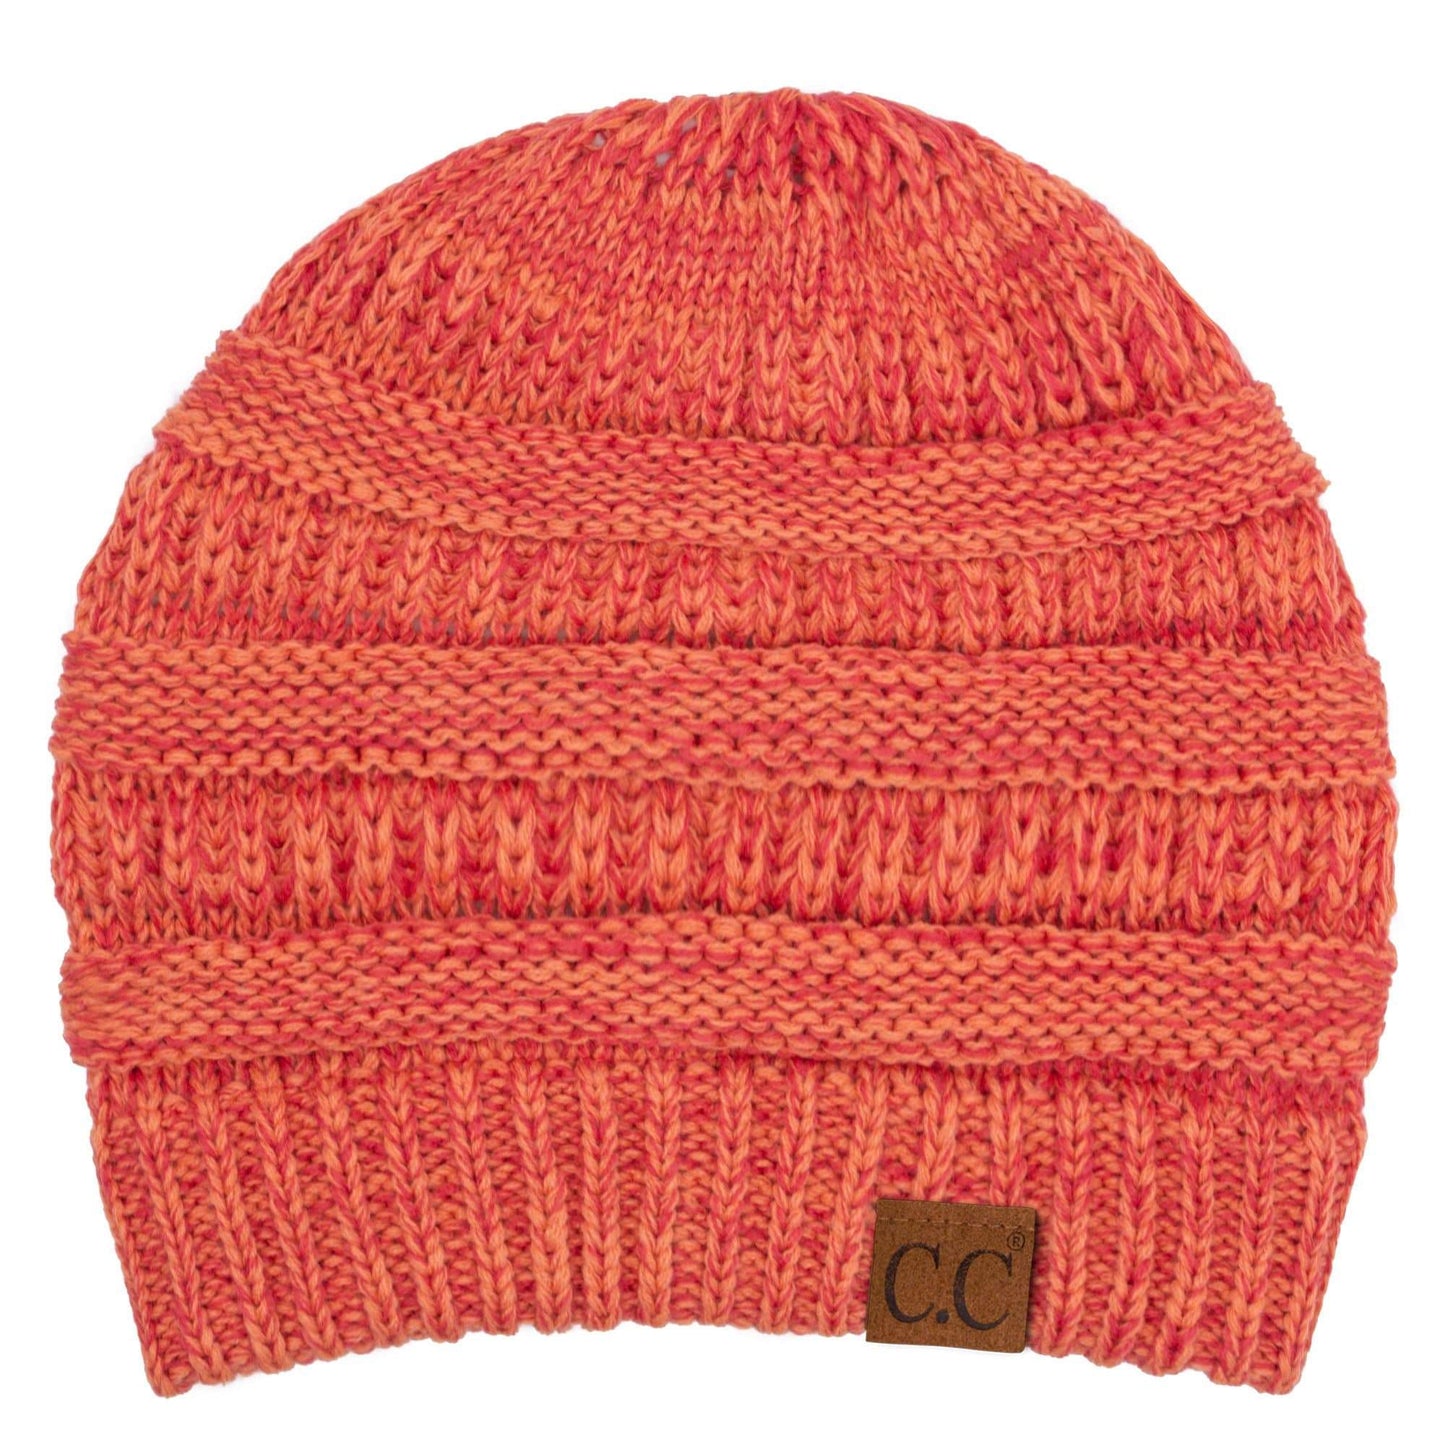 C.C Apparel Two Tone Peach C.C Trendy Warm Chunky Soft Stretch Two-Toned Cable Knit Beanie Skully